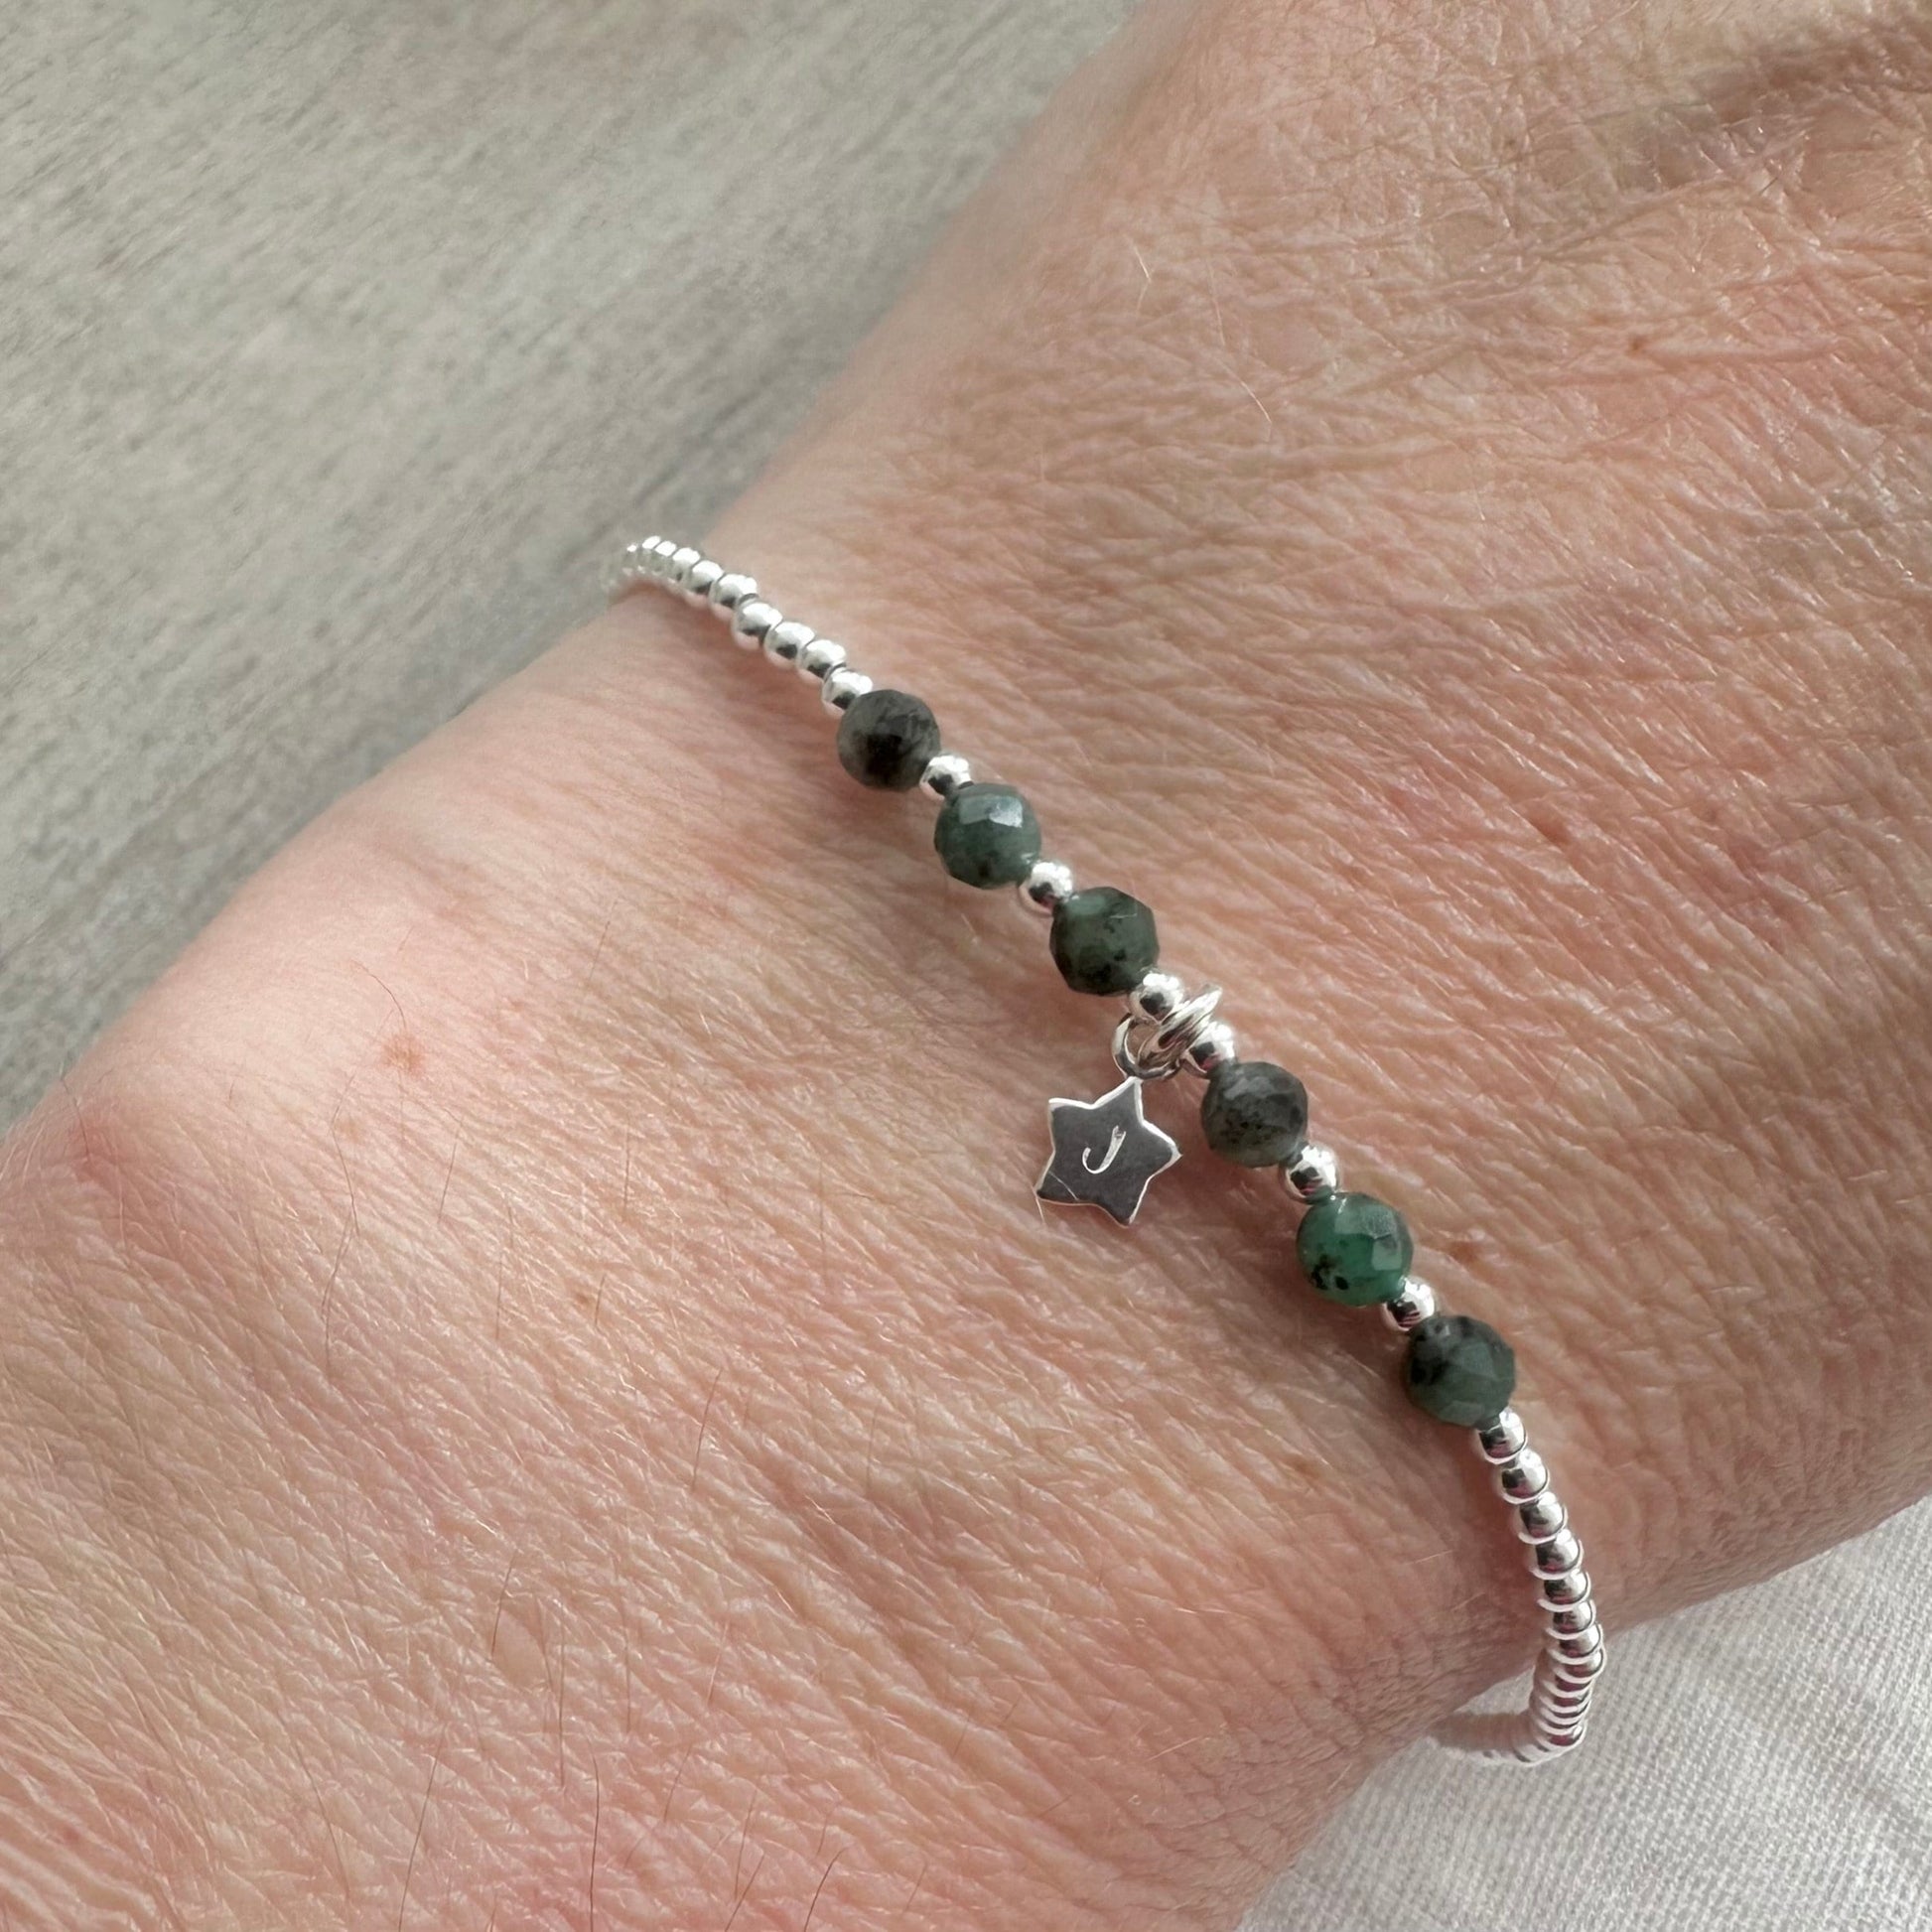 Personalised Emerald May Birthstone Bracelet with star charm, Dainty Jewellery in Sterling Silver